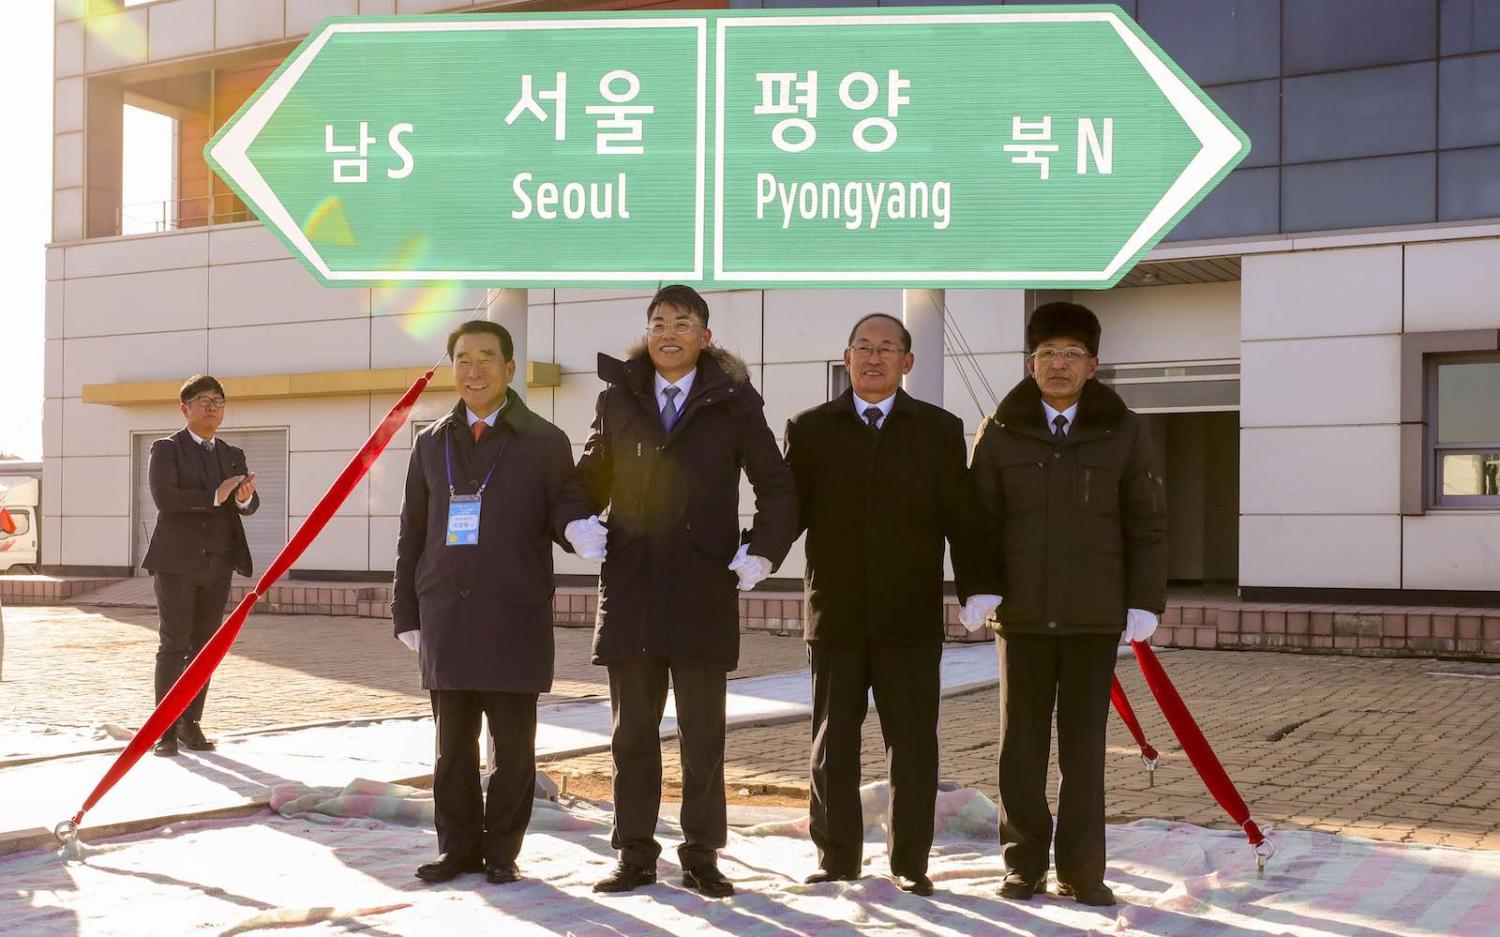 Happier times: South and North Korean government officials in 2018 at Kaesong Industrial Complex, North Korea (Seung-il Ryu via Getty Images)